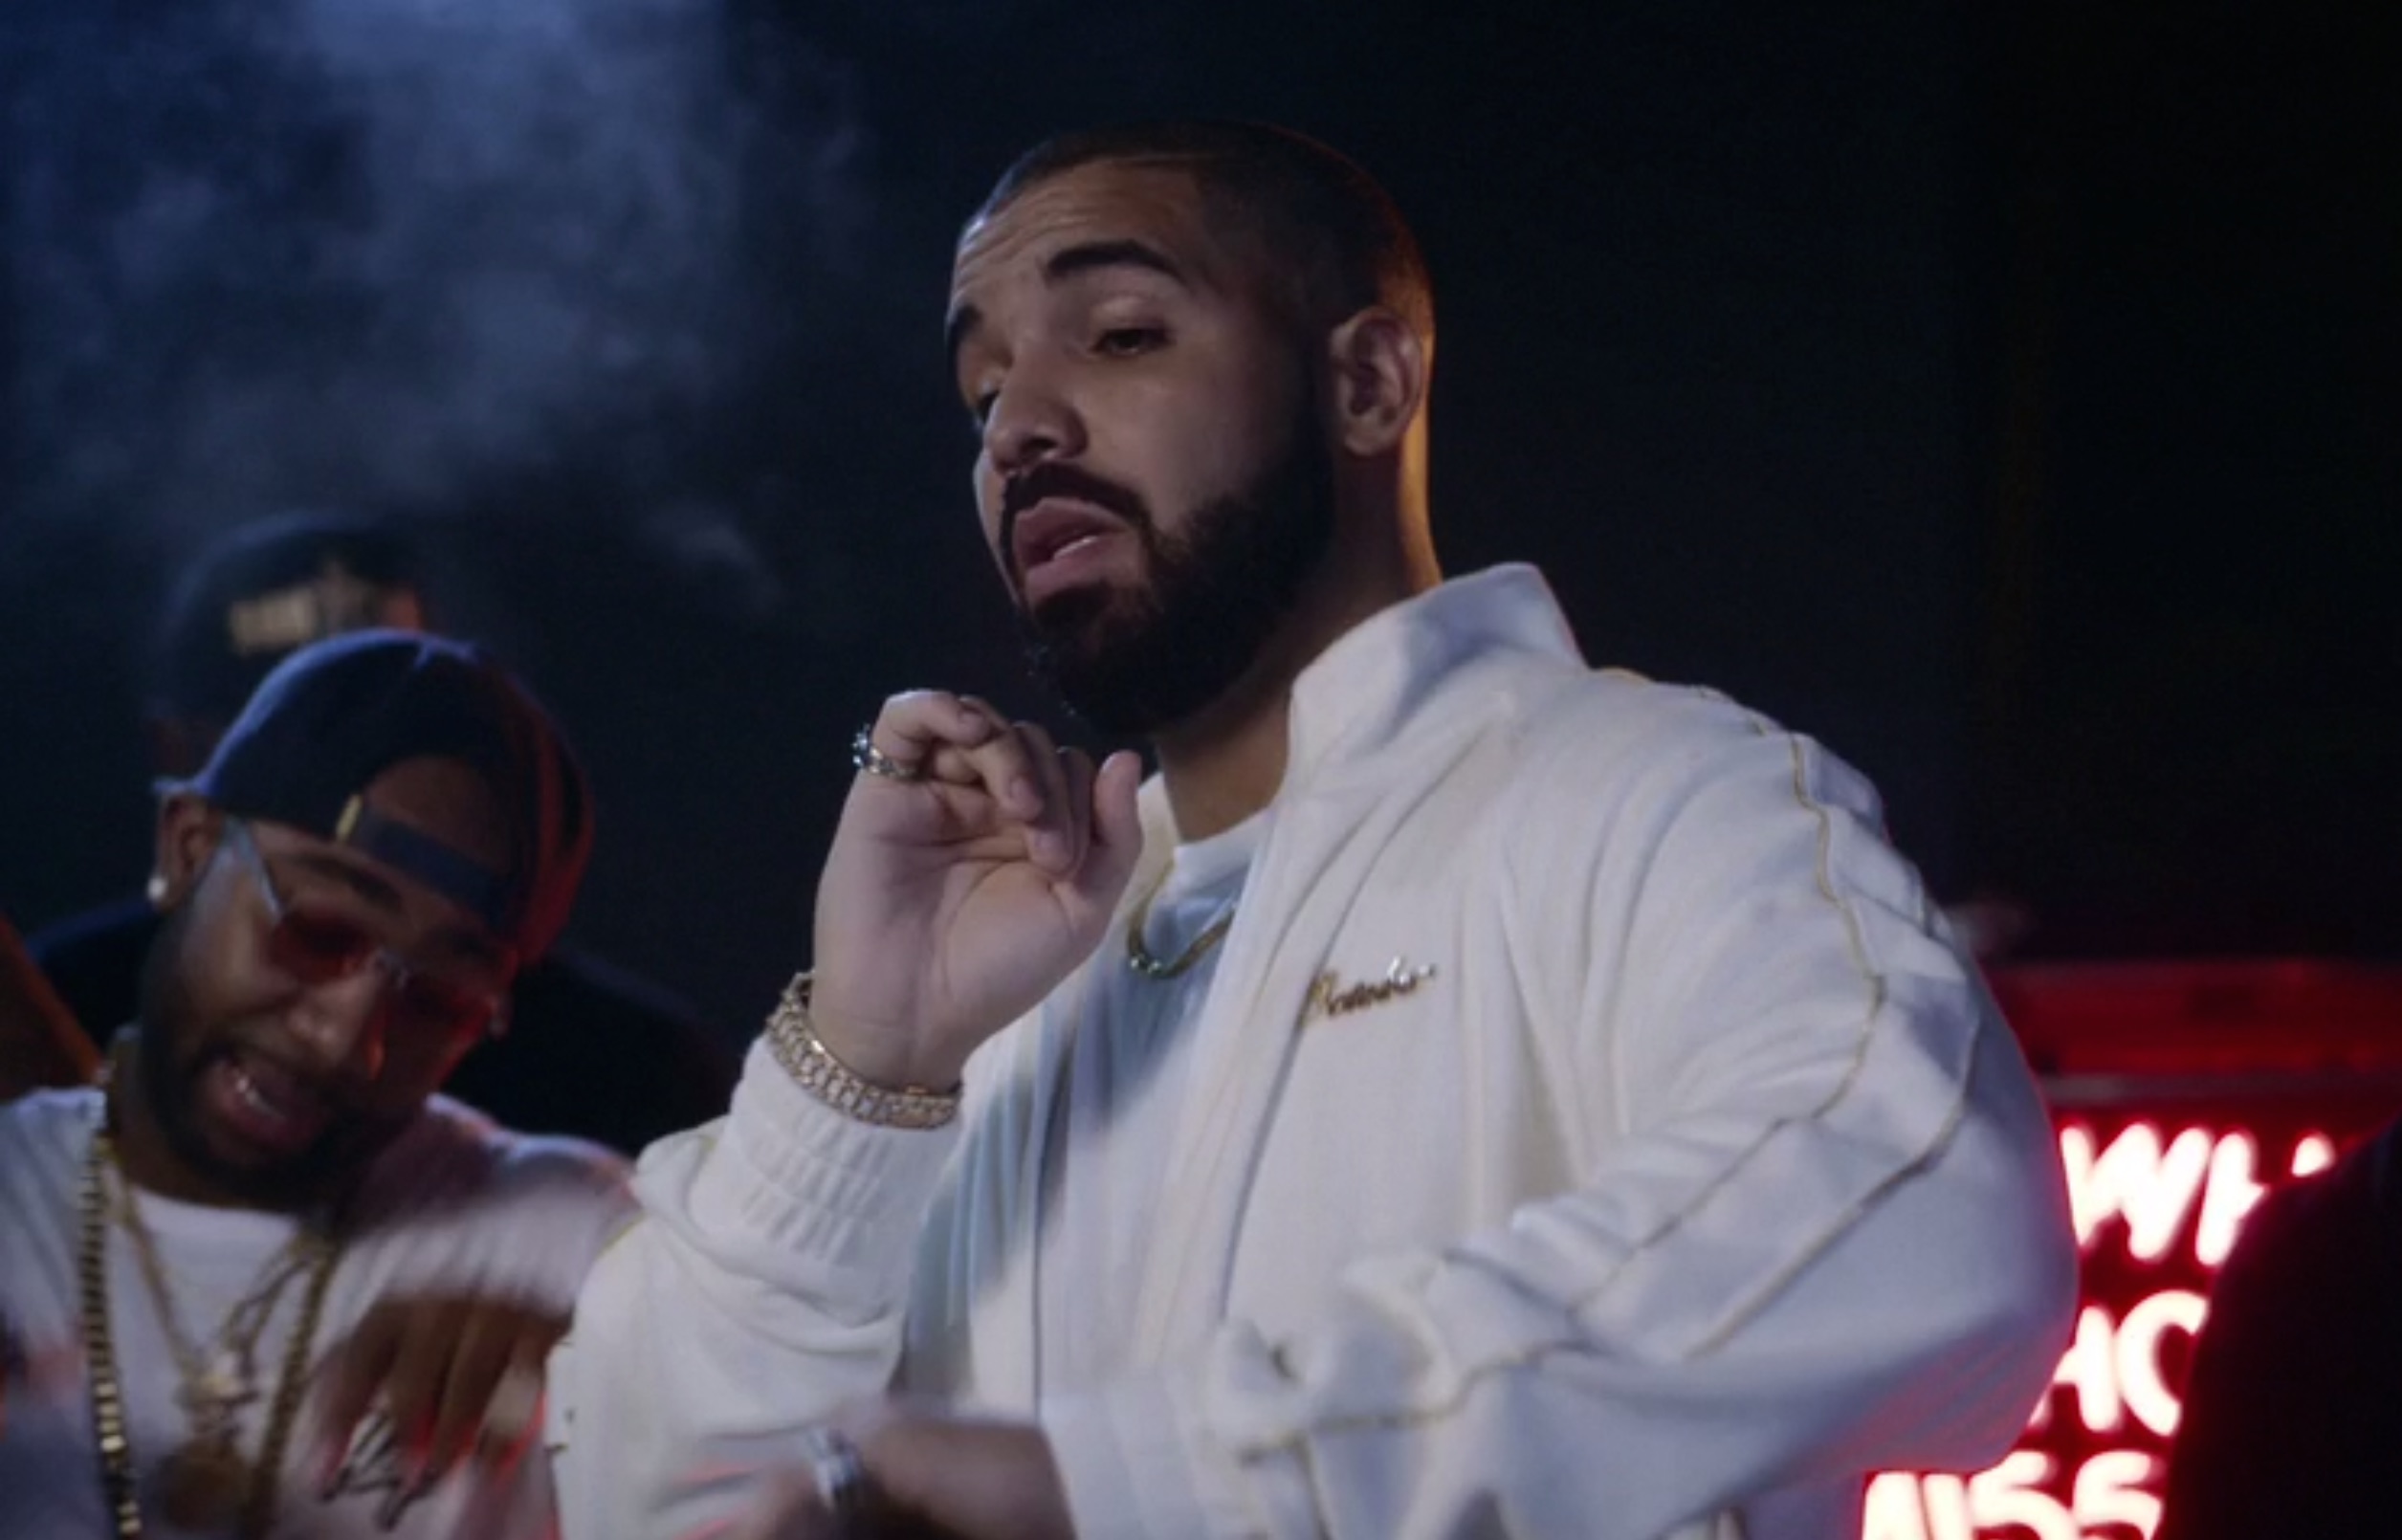 Spotted: Drake In OVO Jacket For His ‘Childs Play’ Music Video